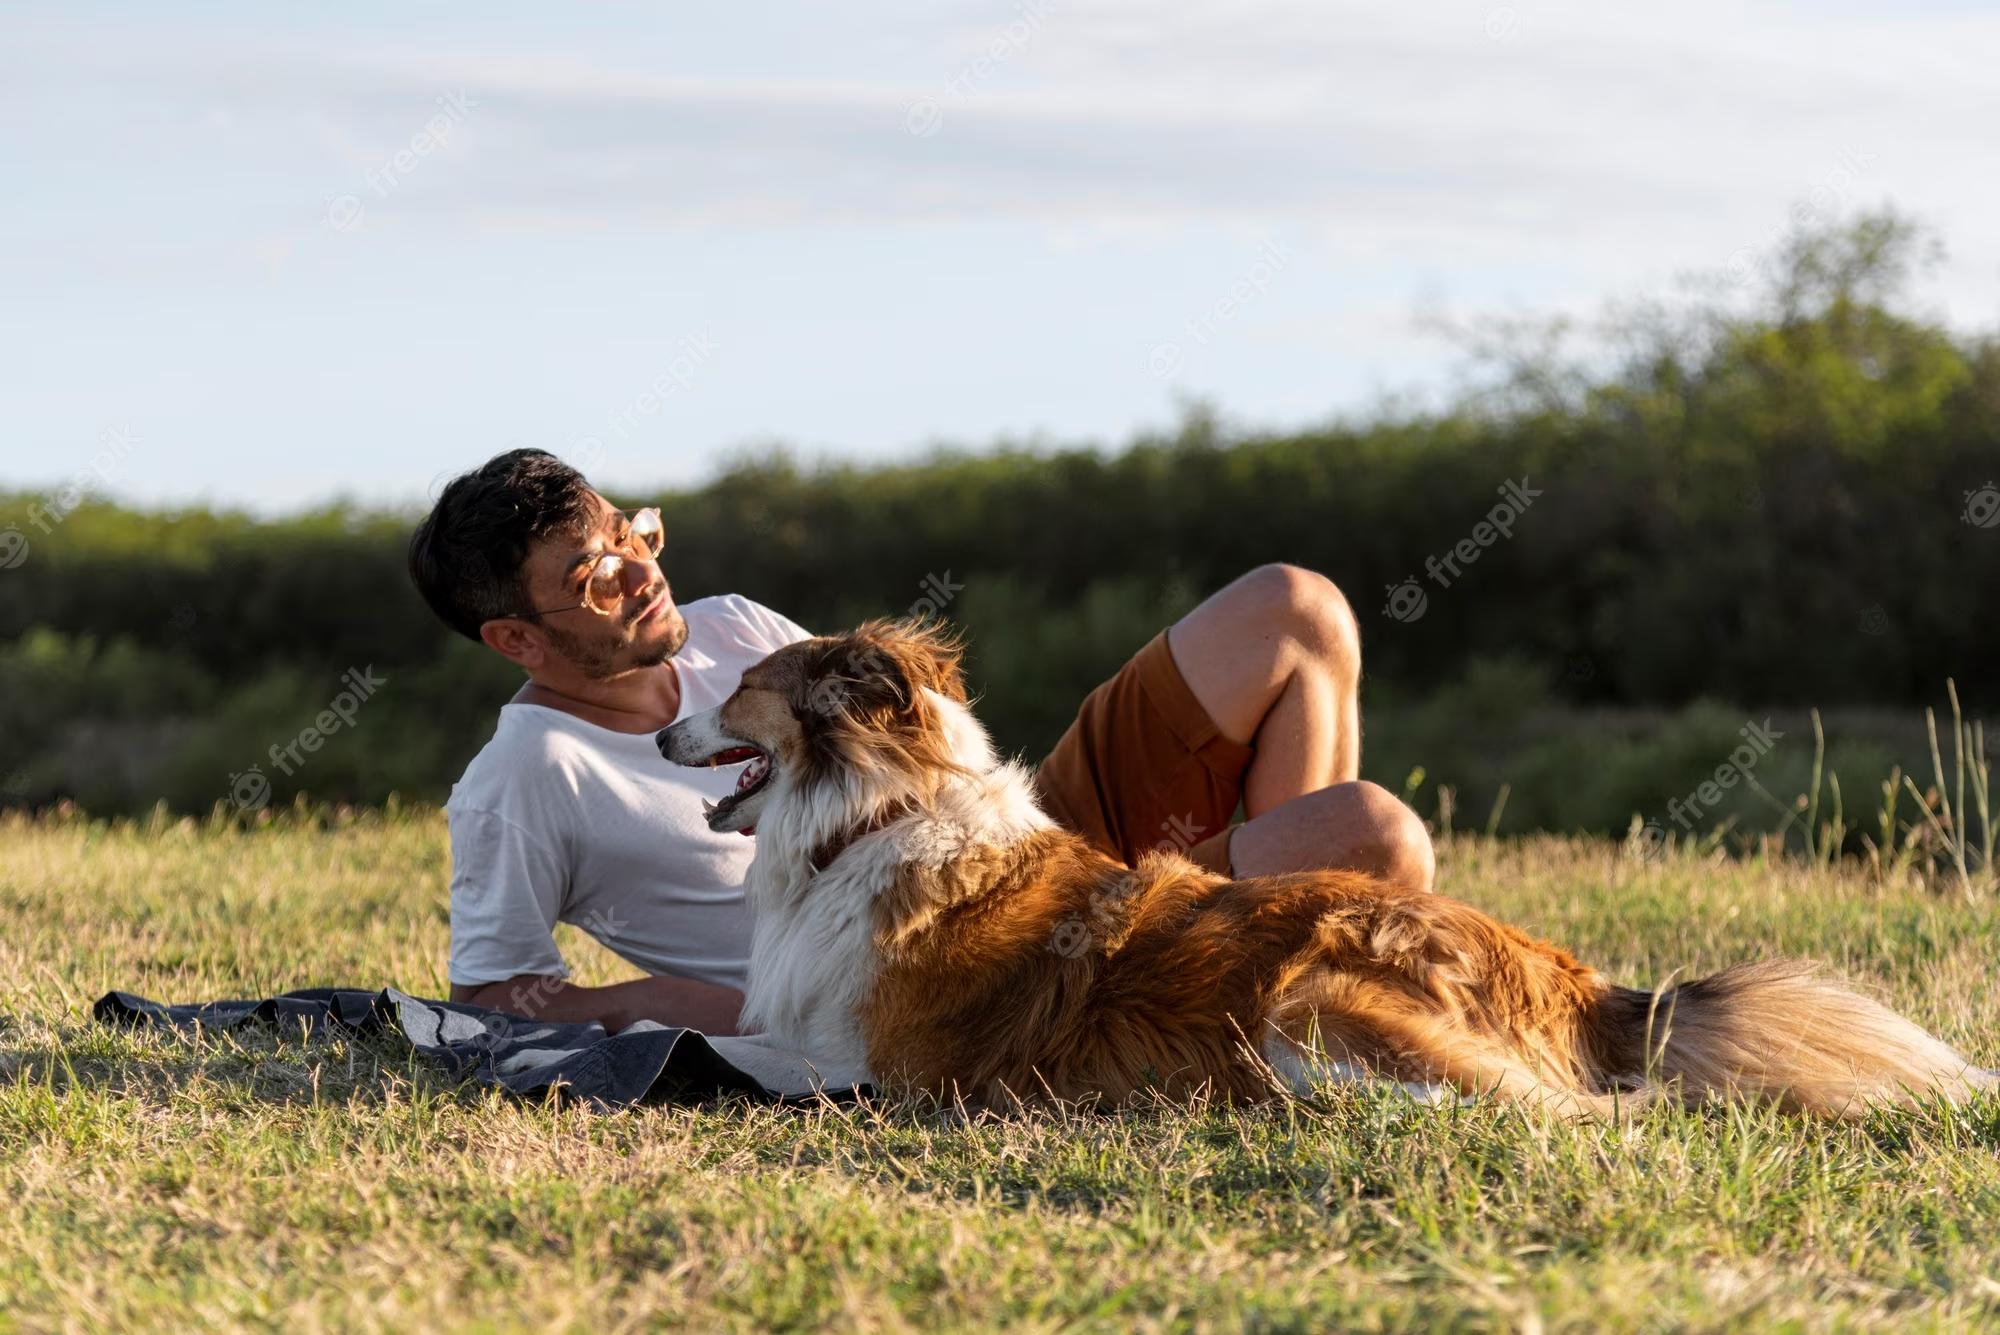 young-man-with-dog-seaside_23-2148885055.jpg